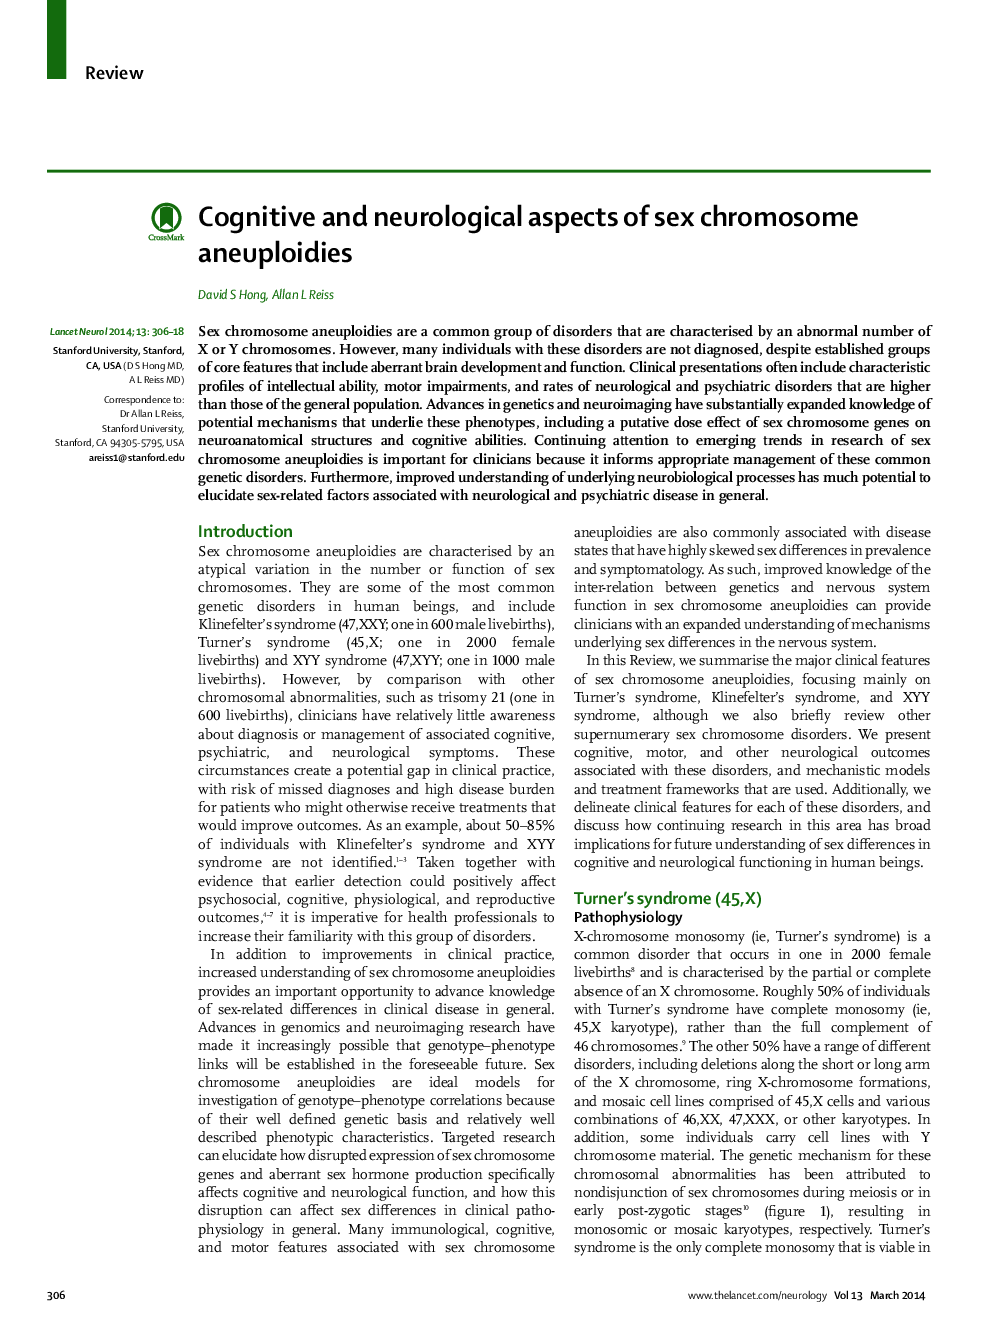 Cognitive and neurological aspects of sex chromosome aneuploidies